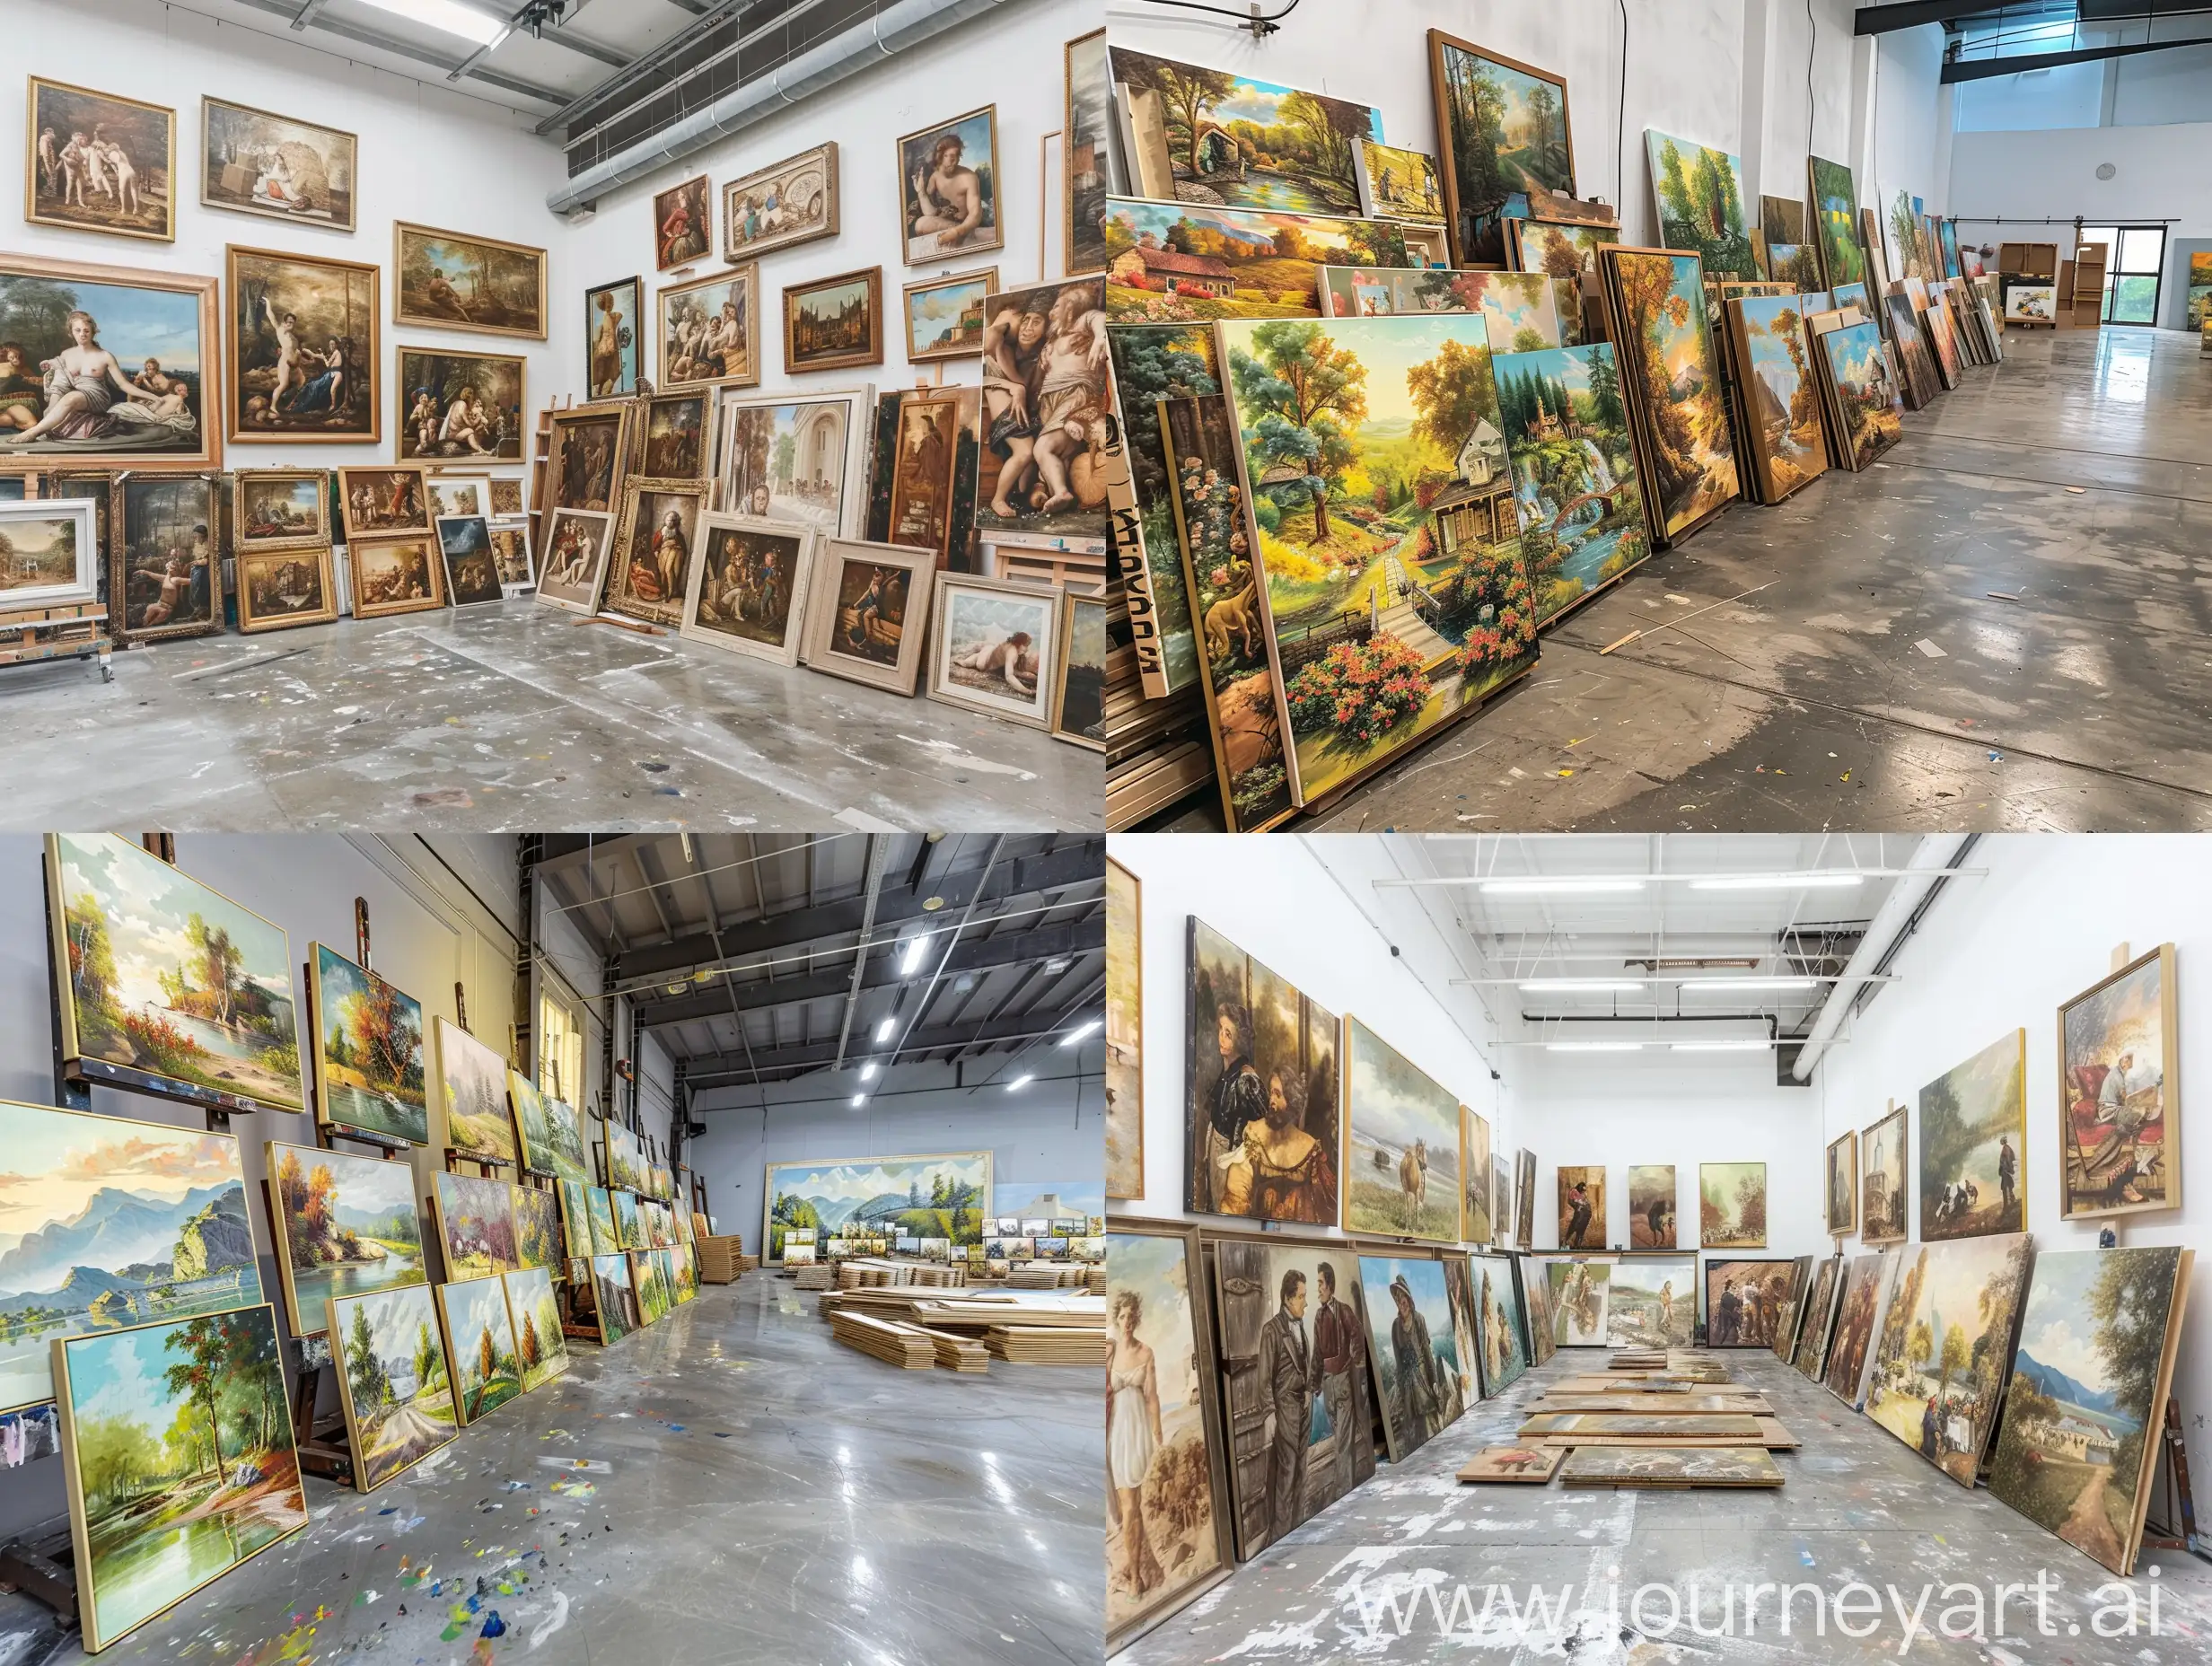 Grand-Oil-Painting-Studio-with-Meticulously-Arranged-HandPainted-Artworks